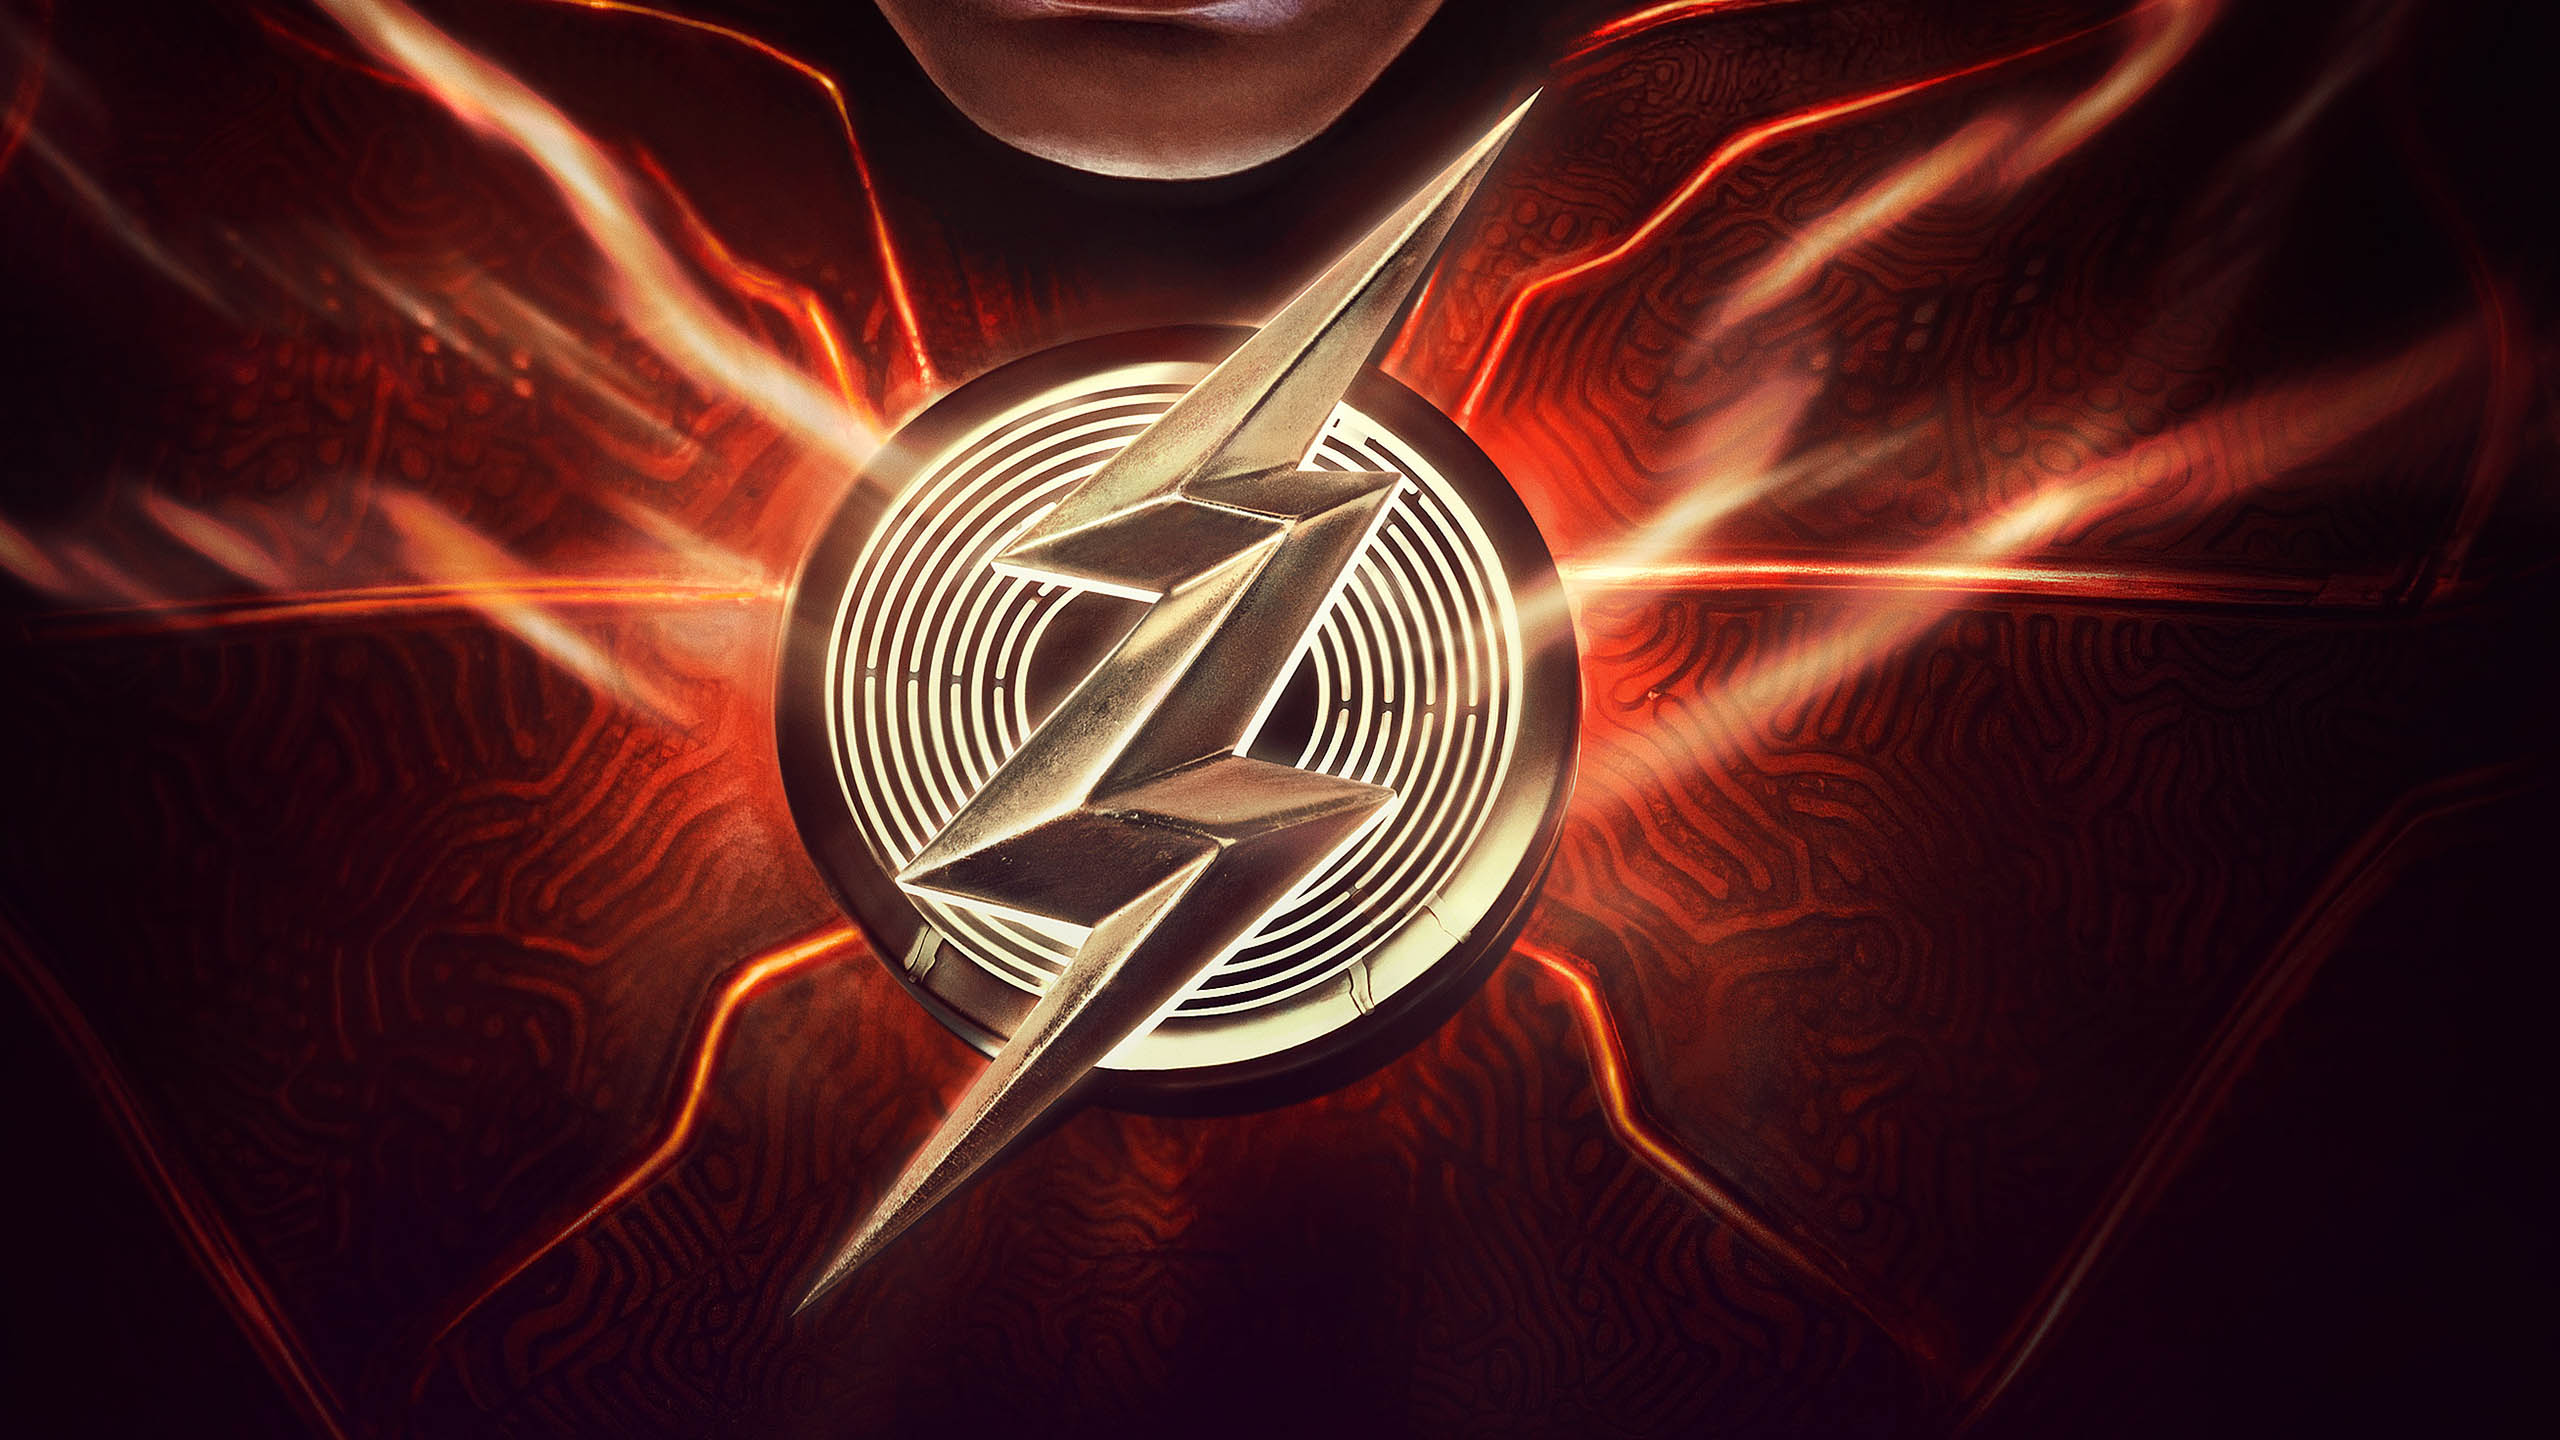 The Flash receives new character posters